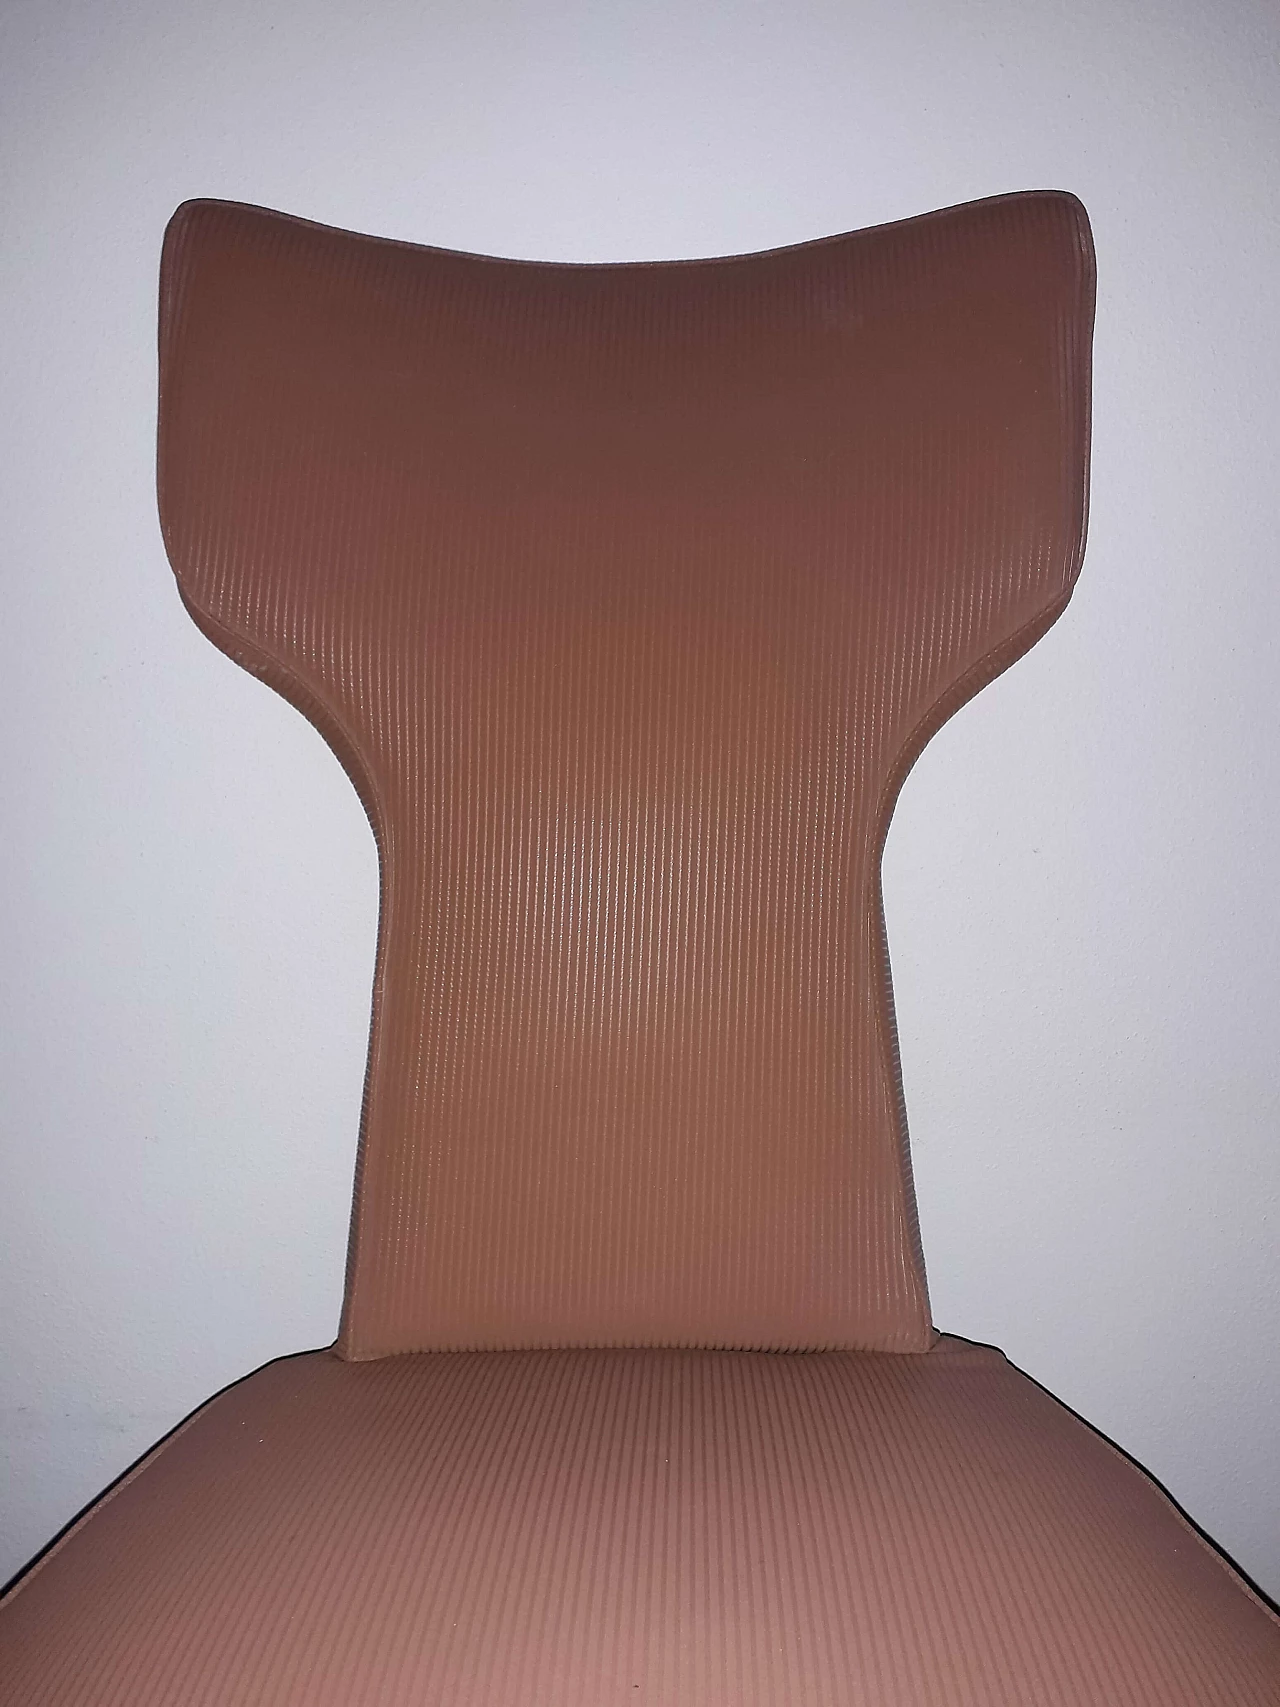 Pink nylon and wood chair attributed to Guglielmo Ulrich, 1940s 12